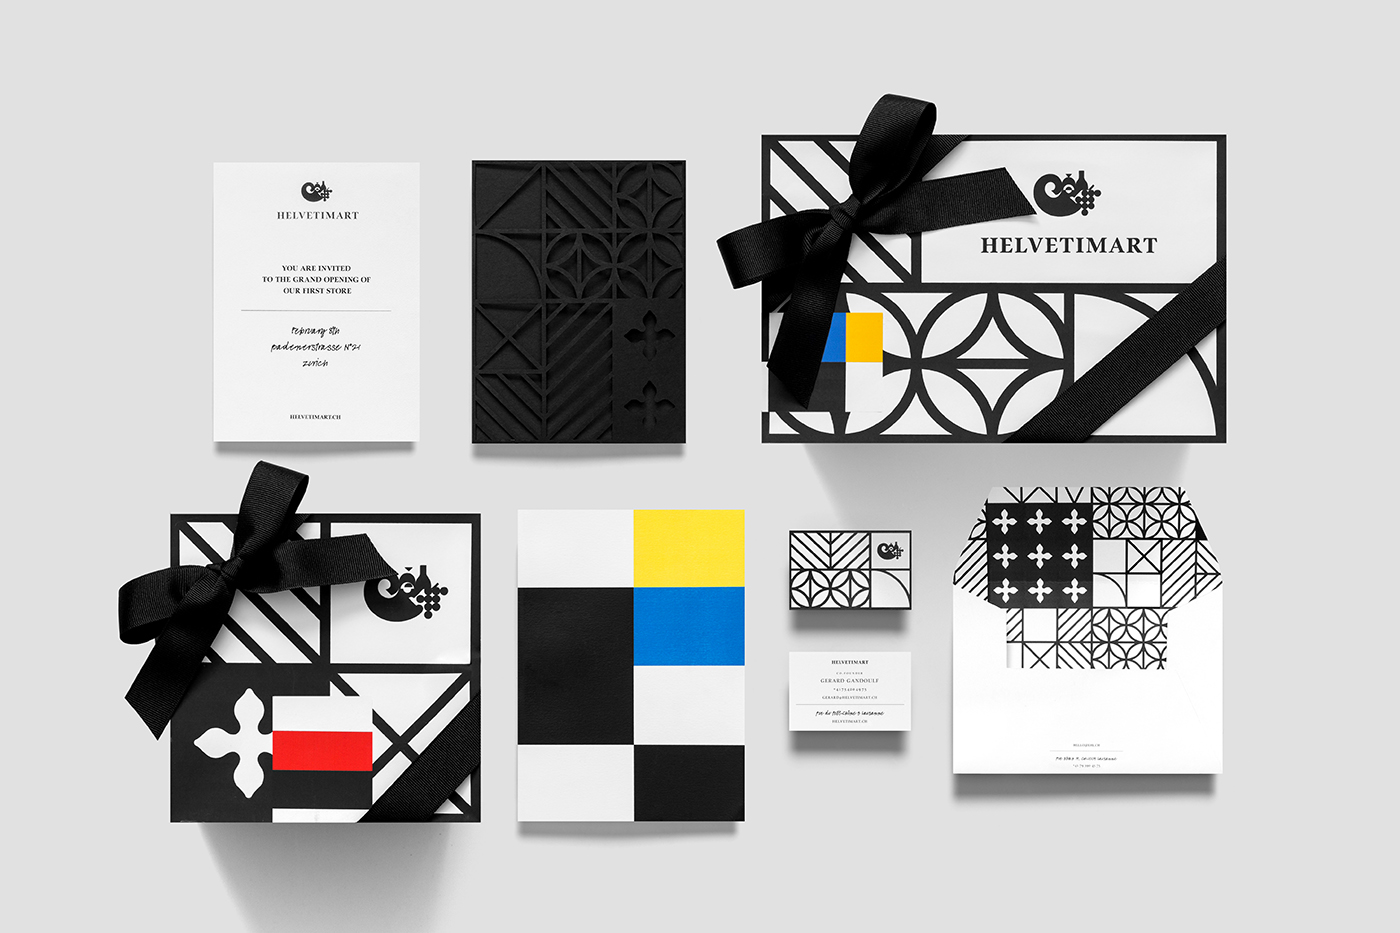 Logo, stationery and packaging by Anagrama for Lausanne-based independent food and speciality supermarket Helvetimart